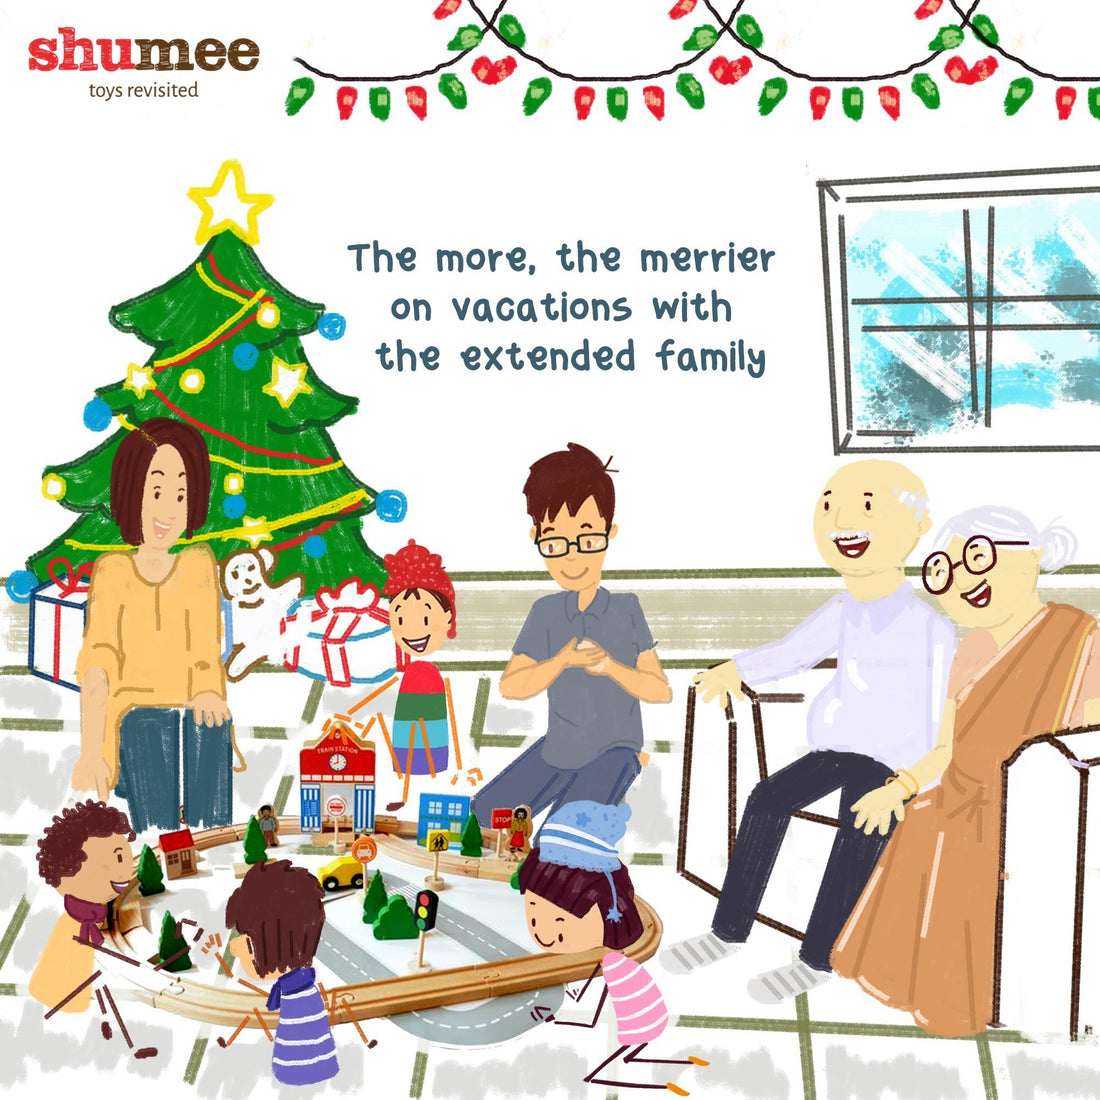 Holidays - a time to be merry with extended family